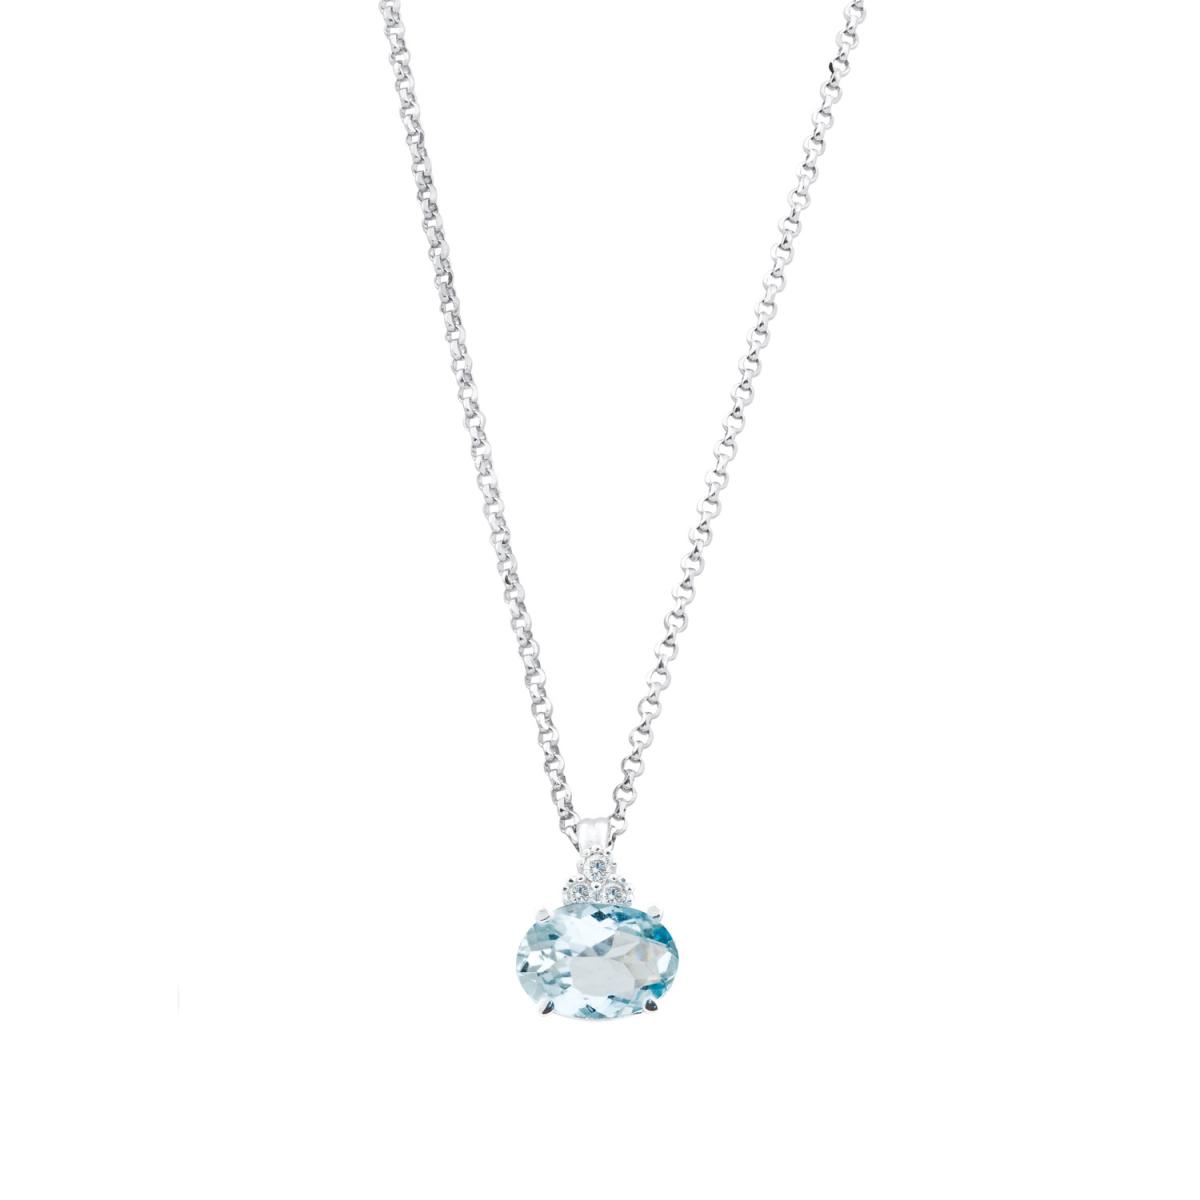 18 kt white gold necklace with aquamarine and diamonds - CD315/AC-LB